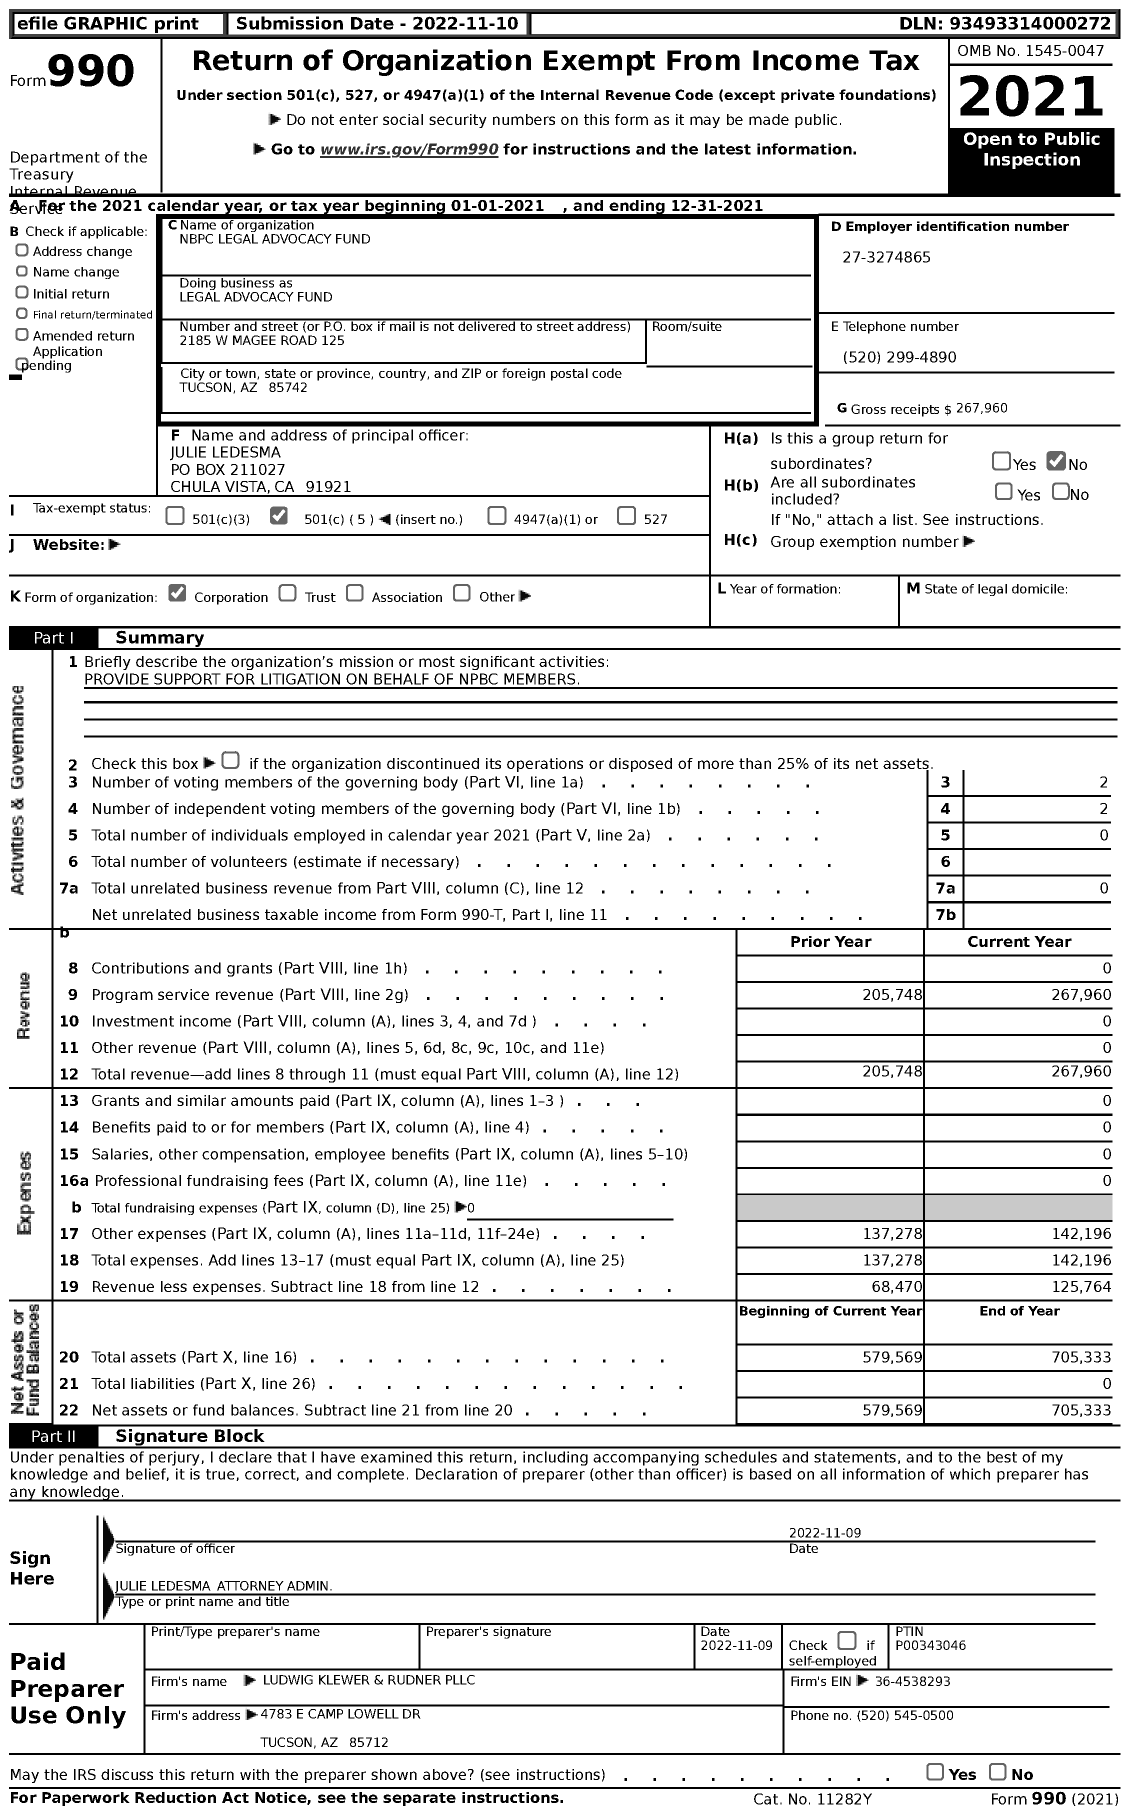 Image of first page of 2021 Form 990 for NBPC Legal Advocacy Fund